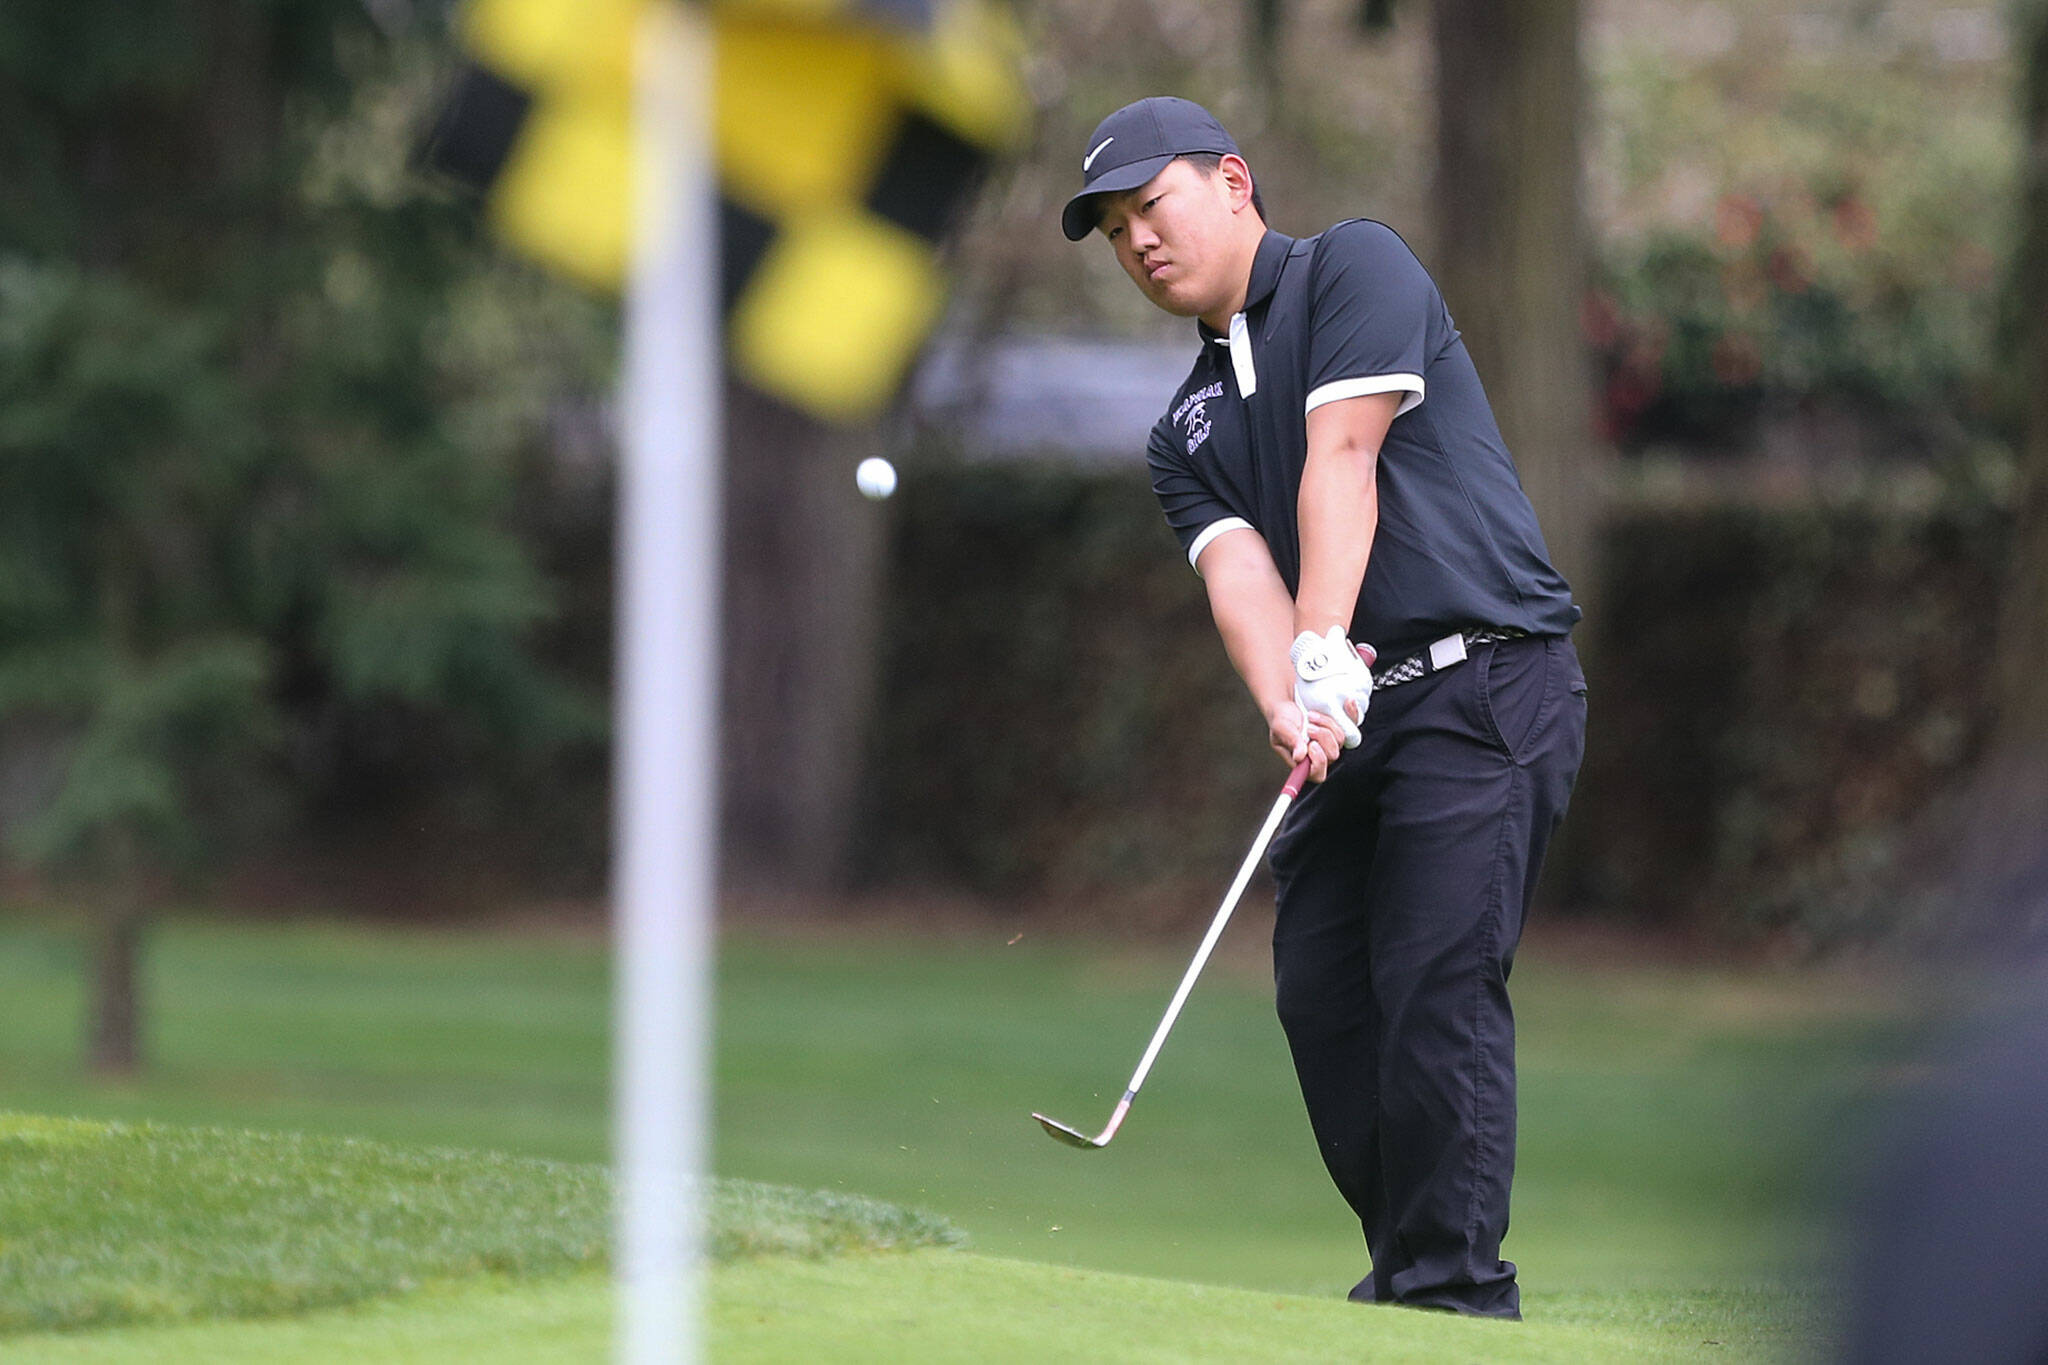 Kamiak's Devin Kim putts during the Tom Dolan Memorial Invitational golf tournament Monday afternoon at Everett Golf & County Club in Everett on April 8, 2019. (Kevin Clark / The Herald)